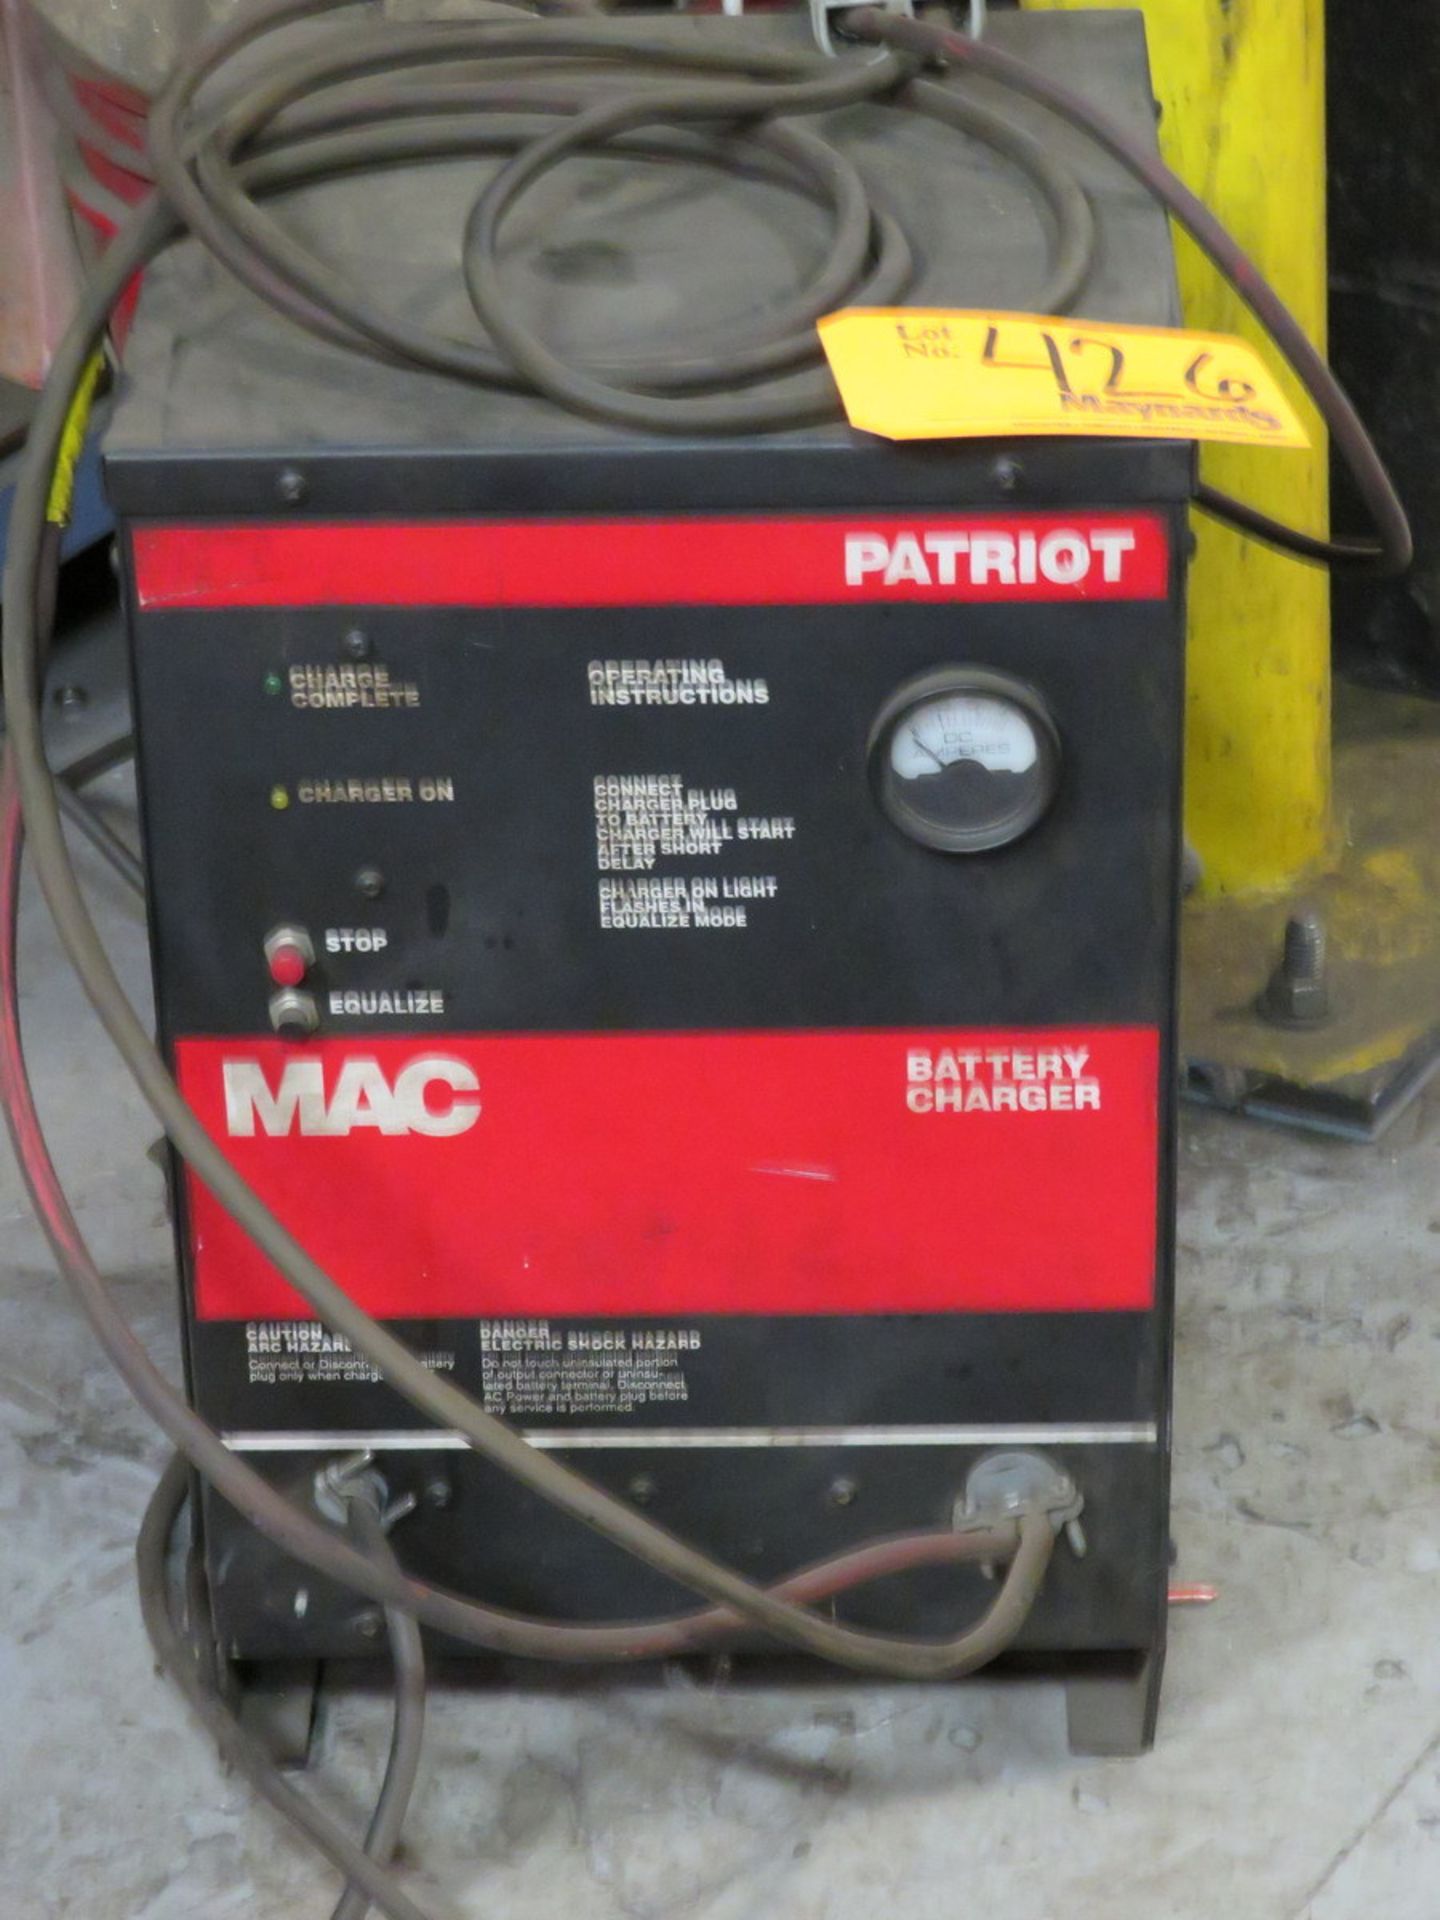 Patriot PAC1240 24V Battery Charger